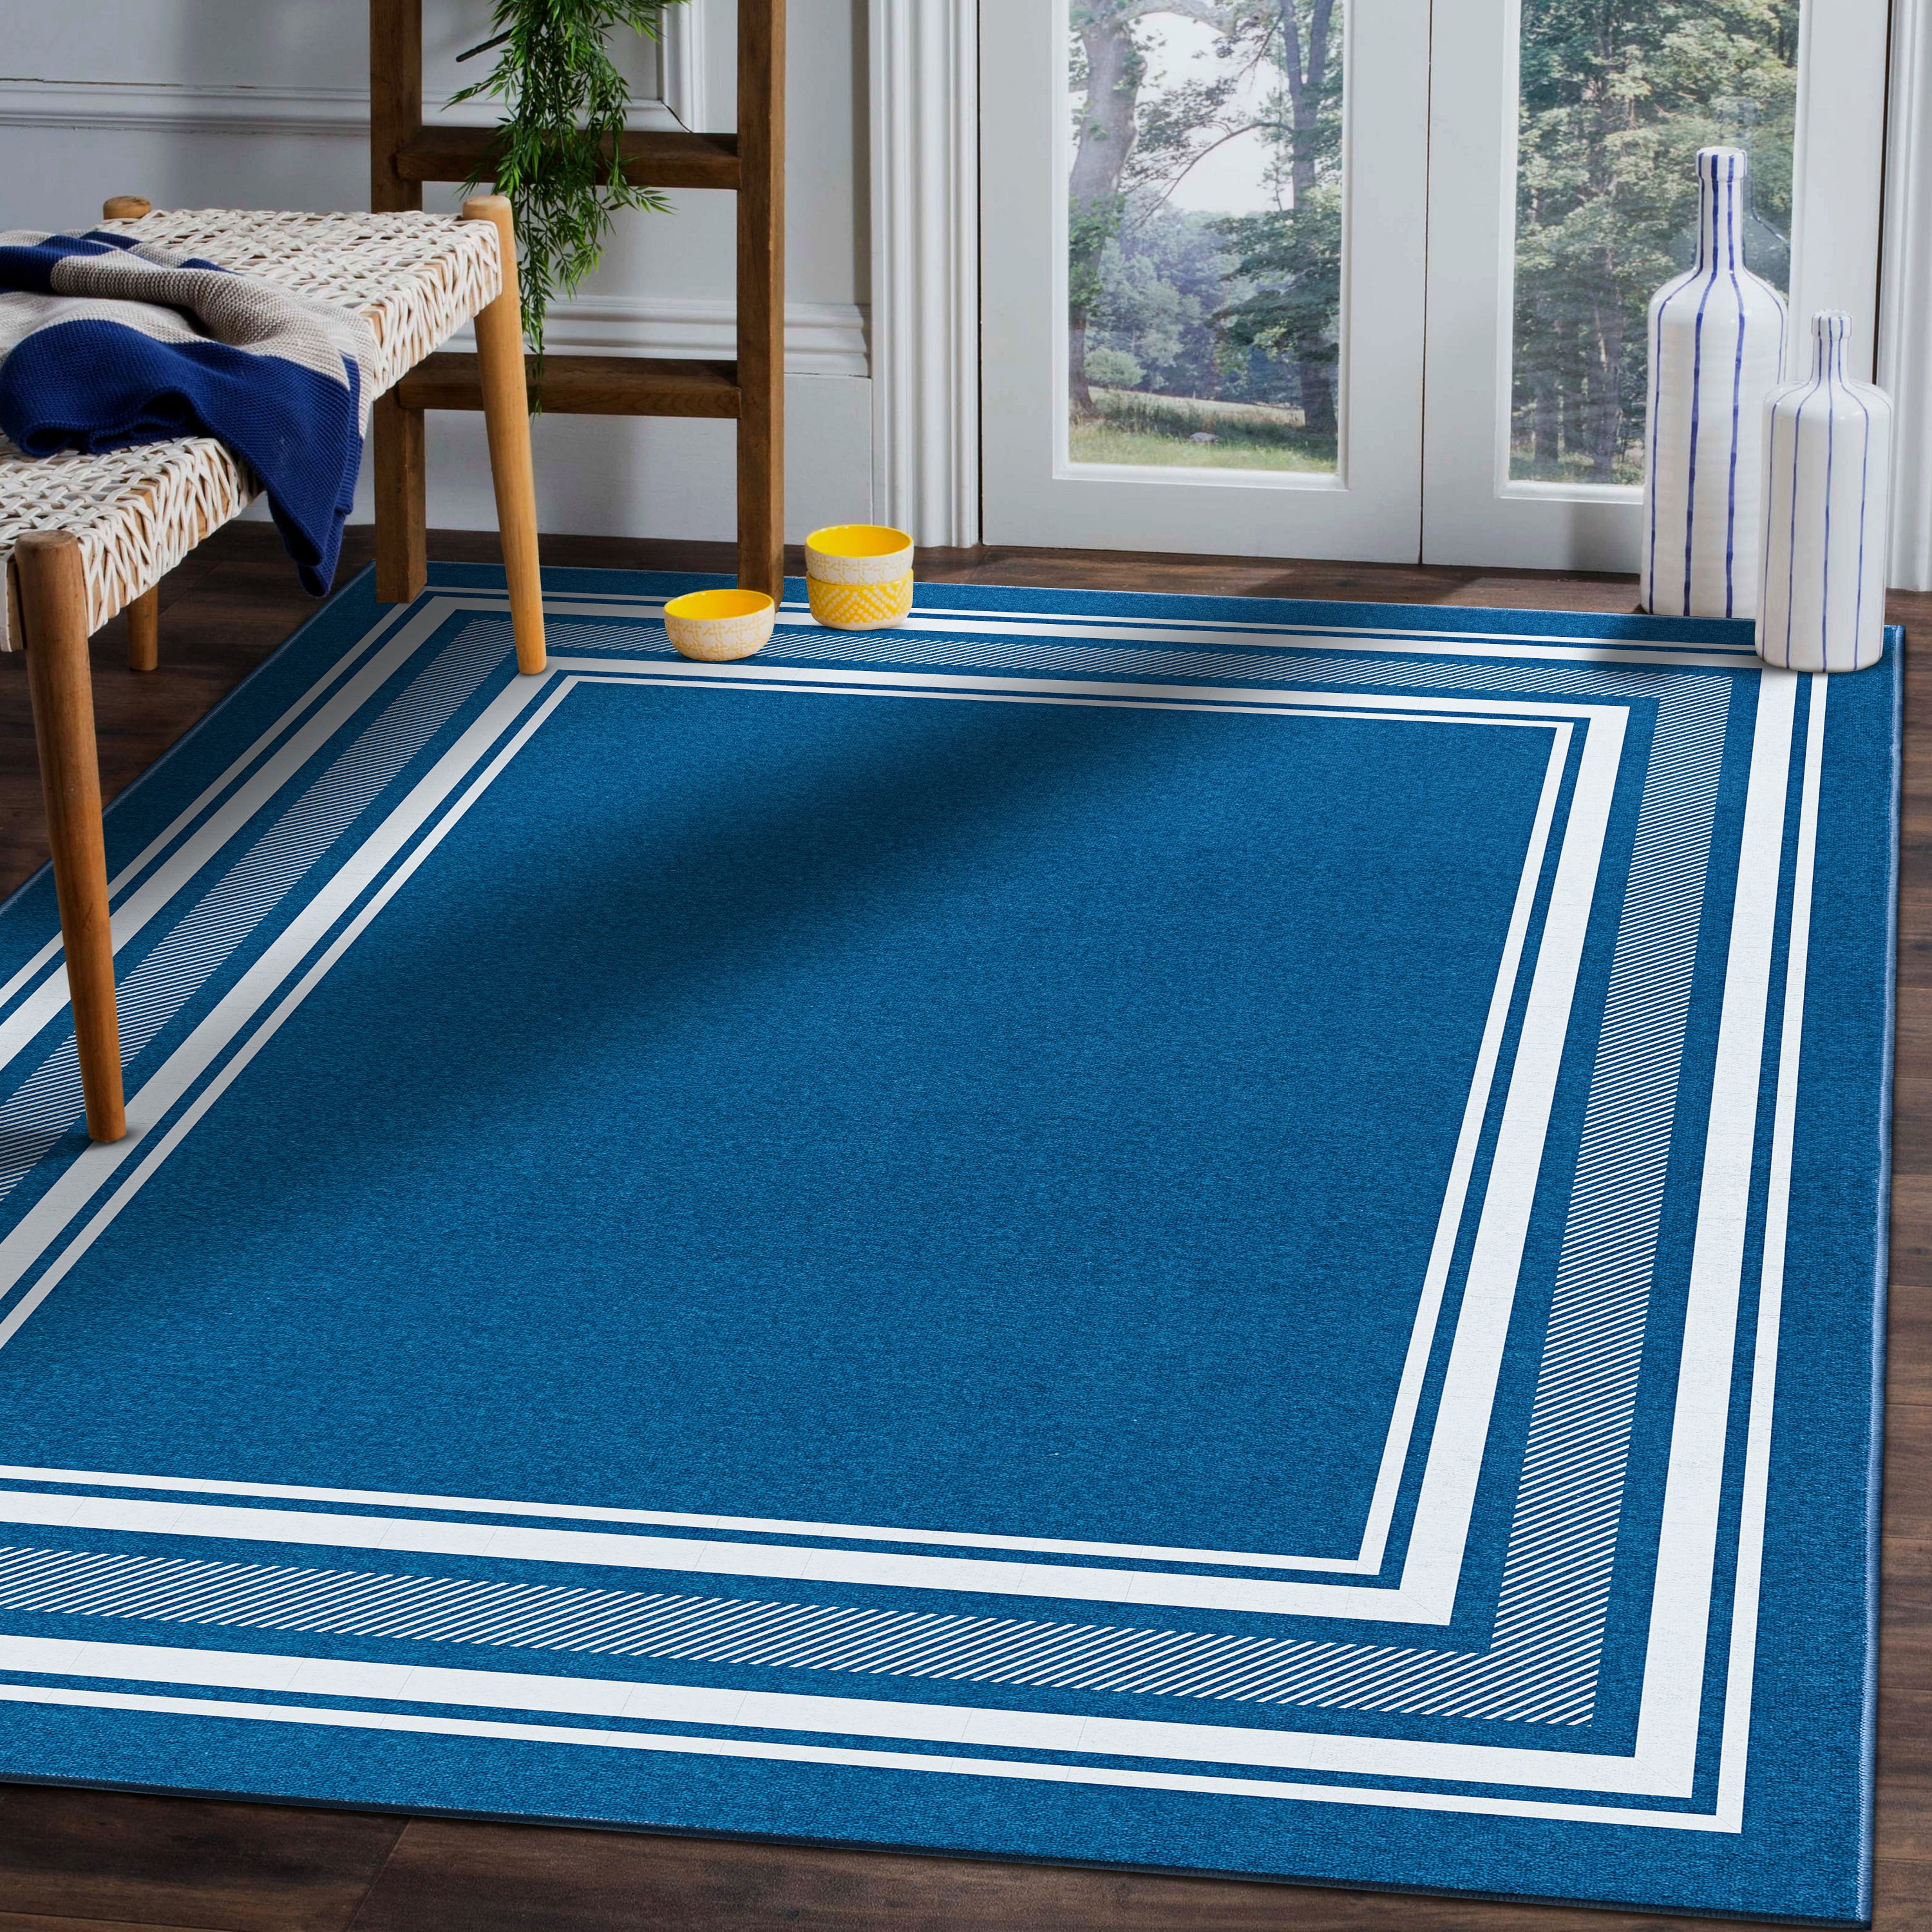 Heavy-Duty Ribbed Indoor Outdoor Carpet Stormy Blue  Indoor outdoor carpet,  Outdoor carpet, Outdoor carpet for decks